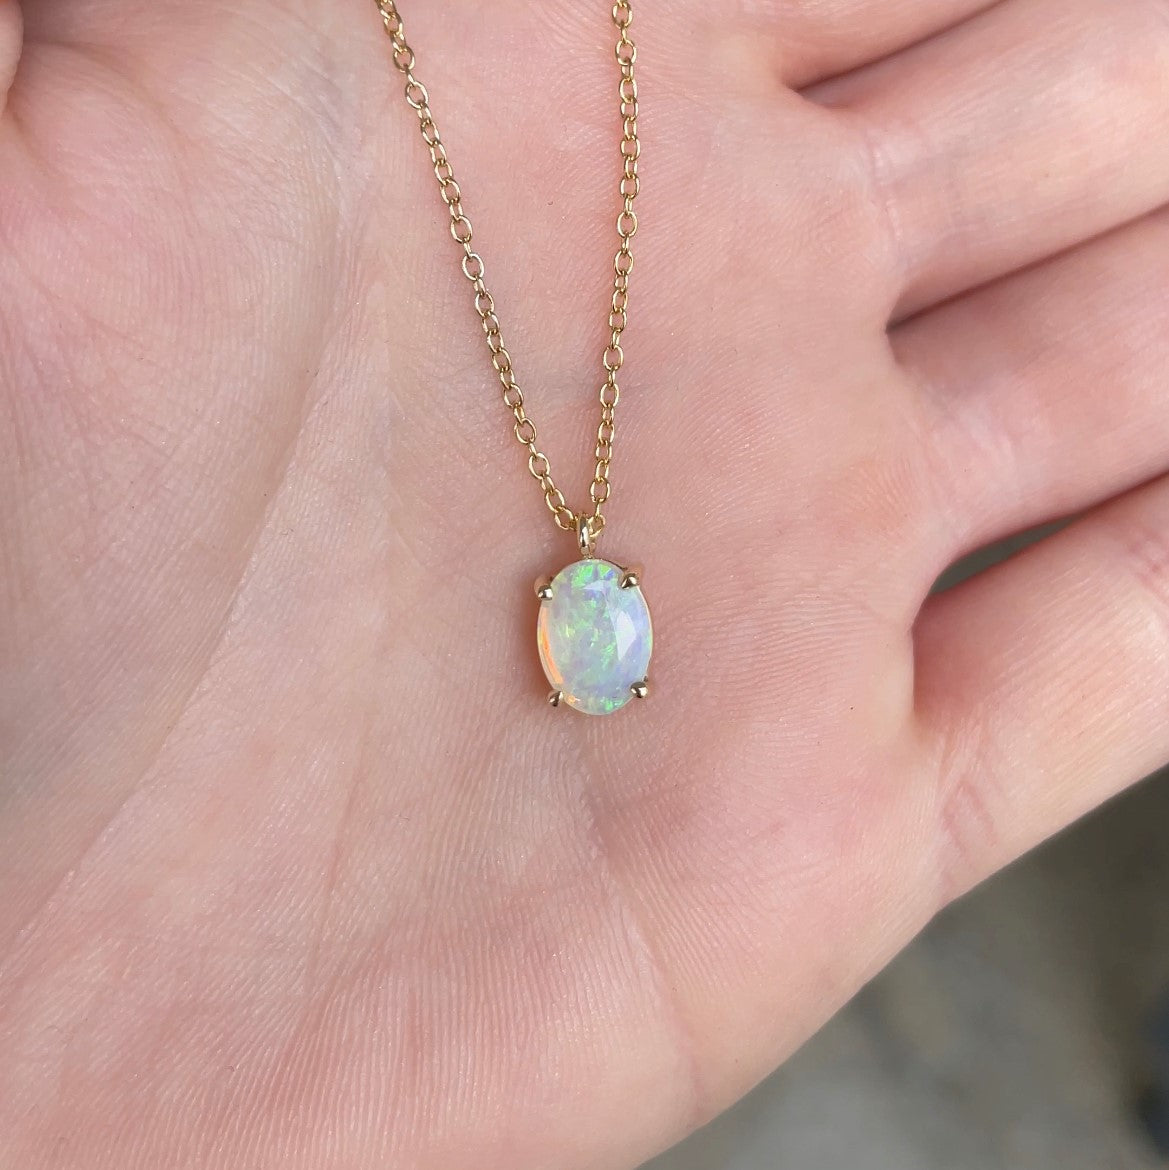 Here is a boulder opal necklace with champagne diamond accents.